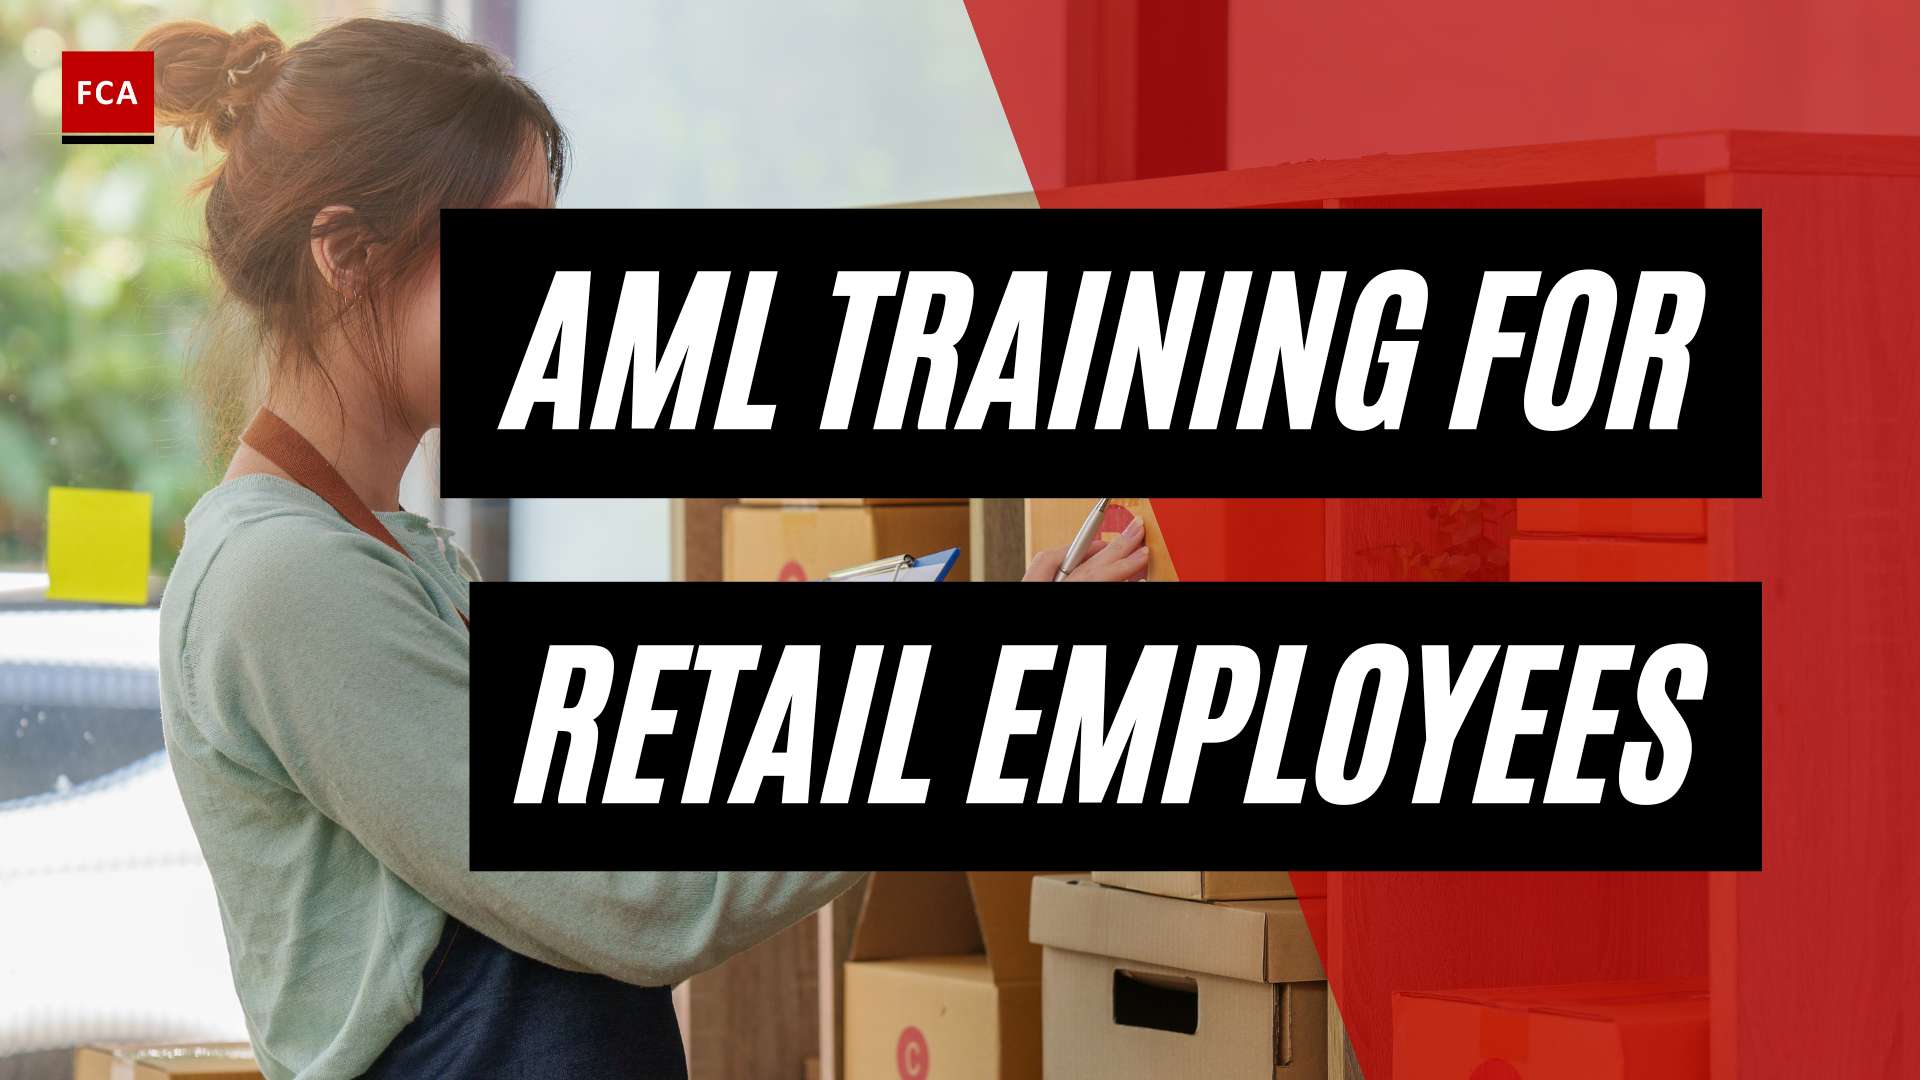 Empowering Retail Staff: The Importance Of Aml Training For Employees